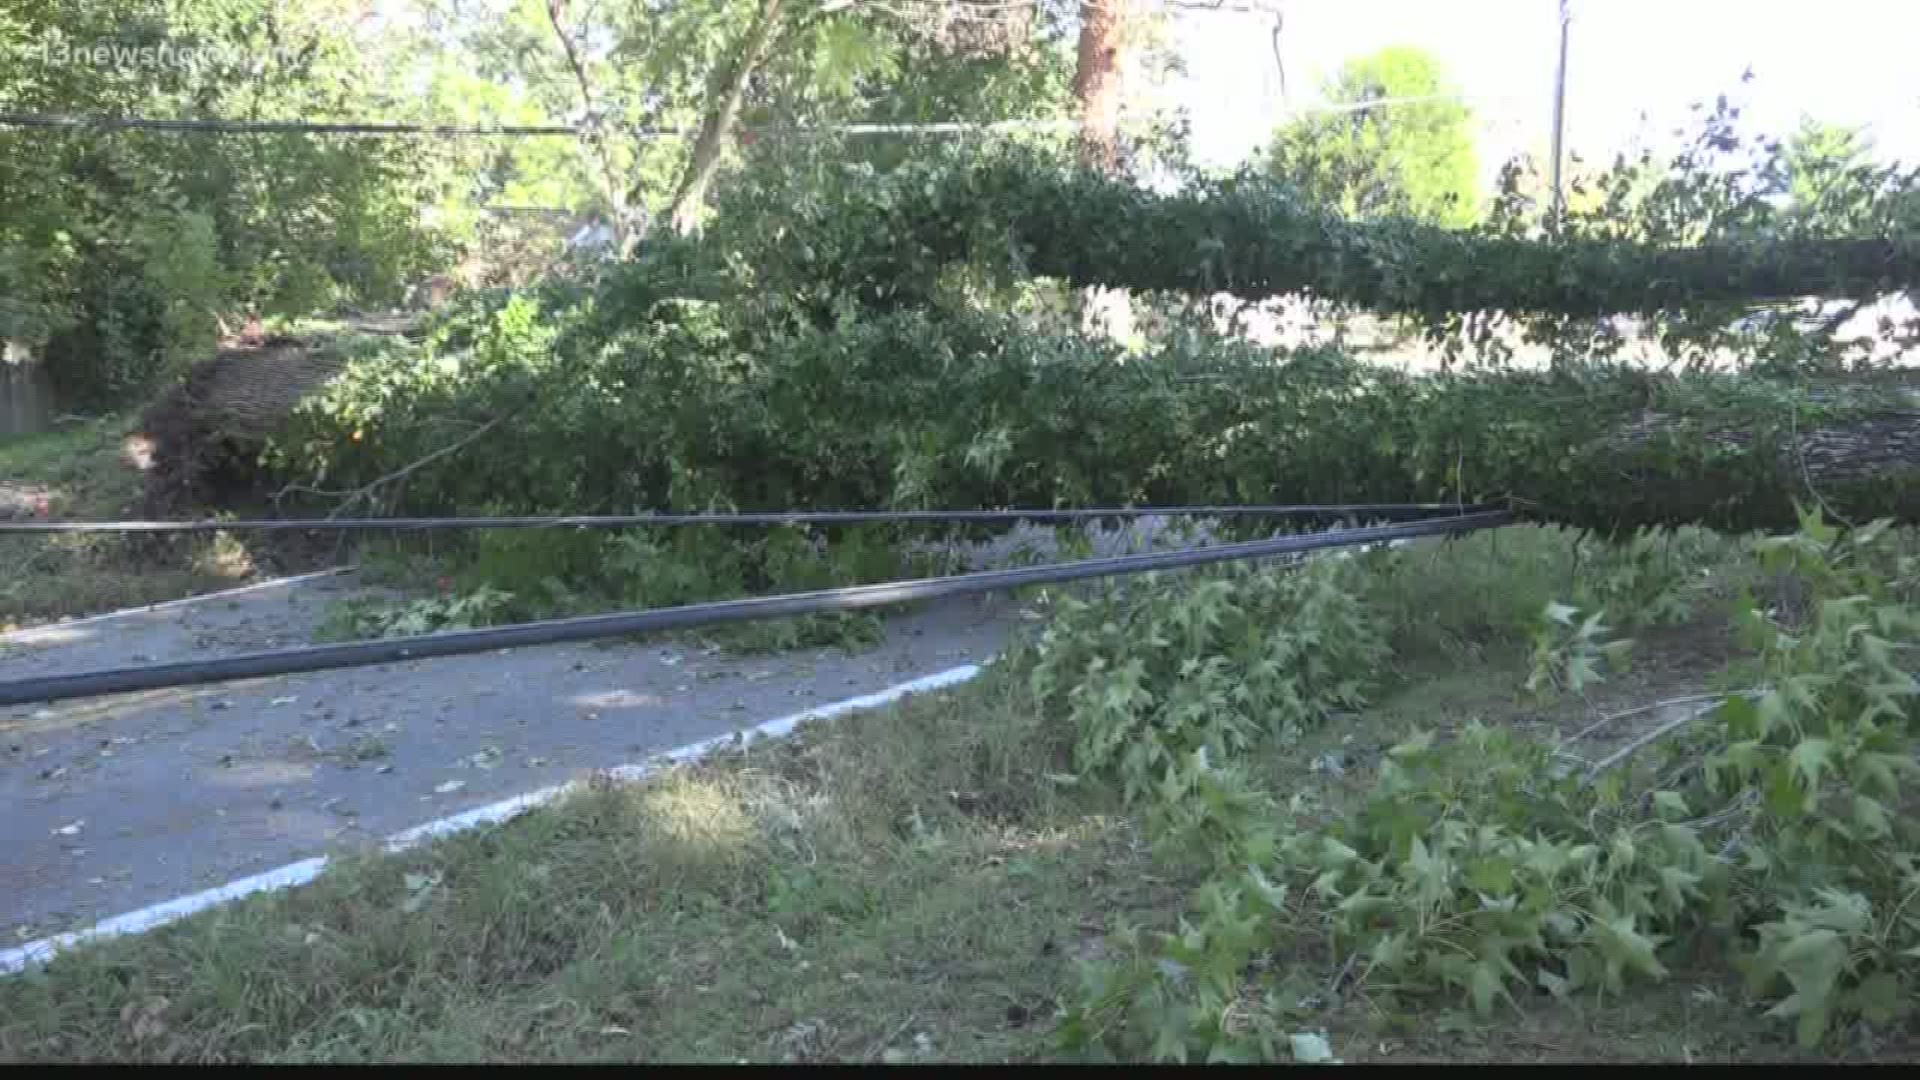 Cleanup is underway across Hampton Roads after Tropical Storm Michael left its mark.